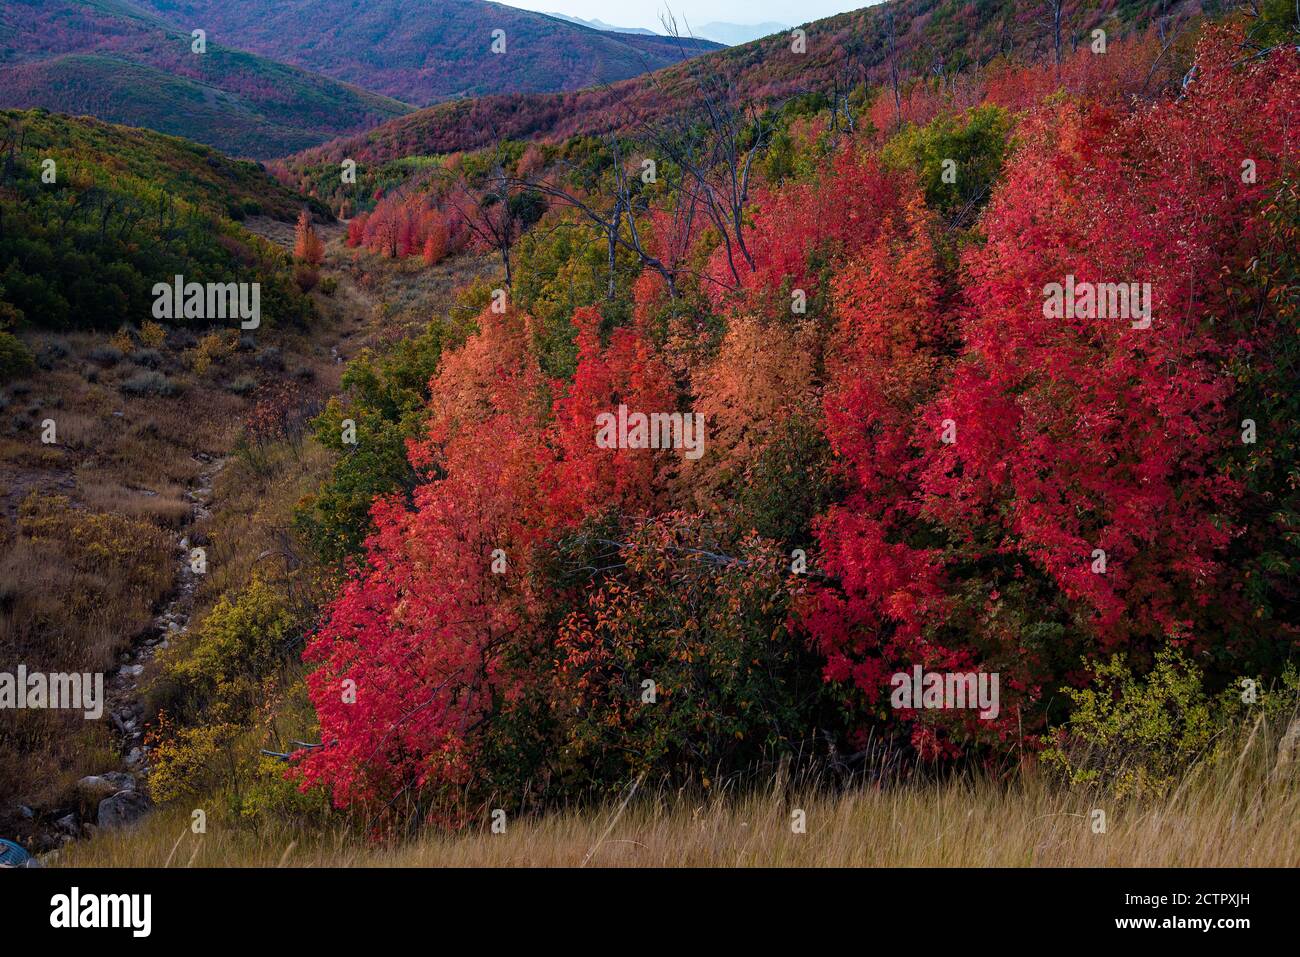 Autumn colors of the famous Alpine Loop in American Fork Canyon, Utah, USA.  The Narrow and winding road of 'The Loop' provides dramatic fall scenery. Stock Photo